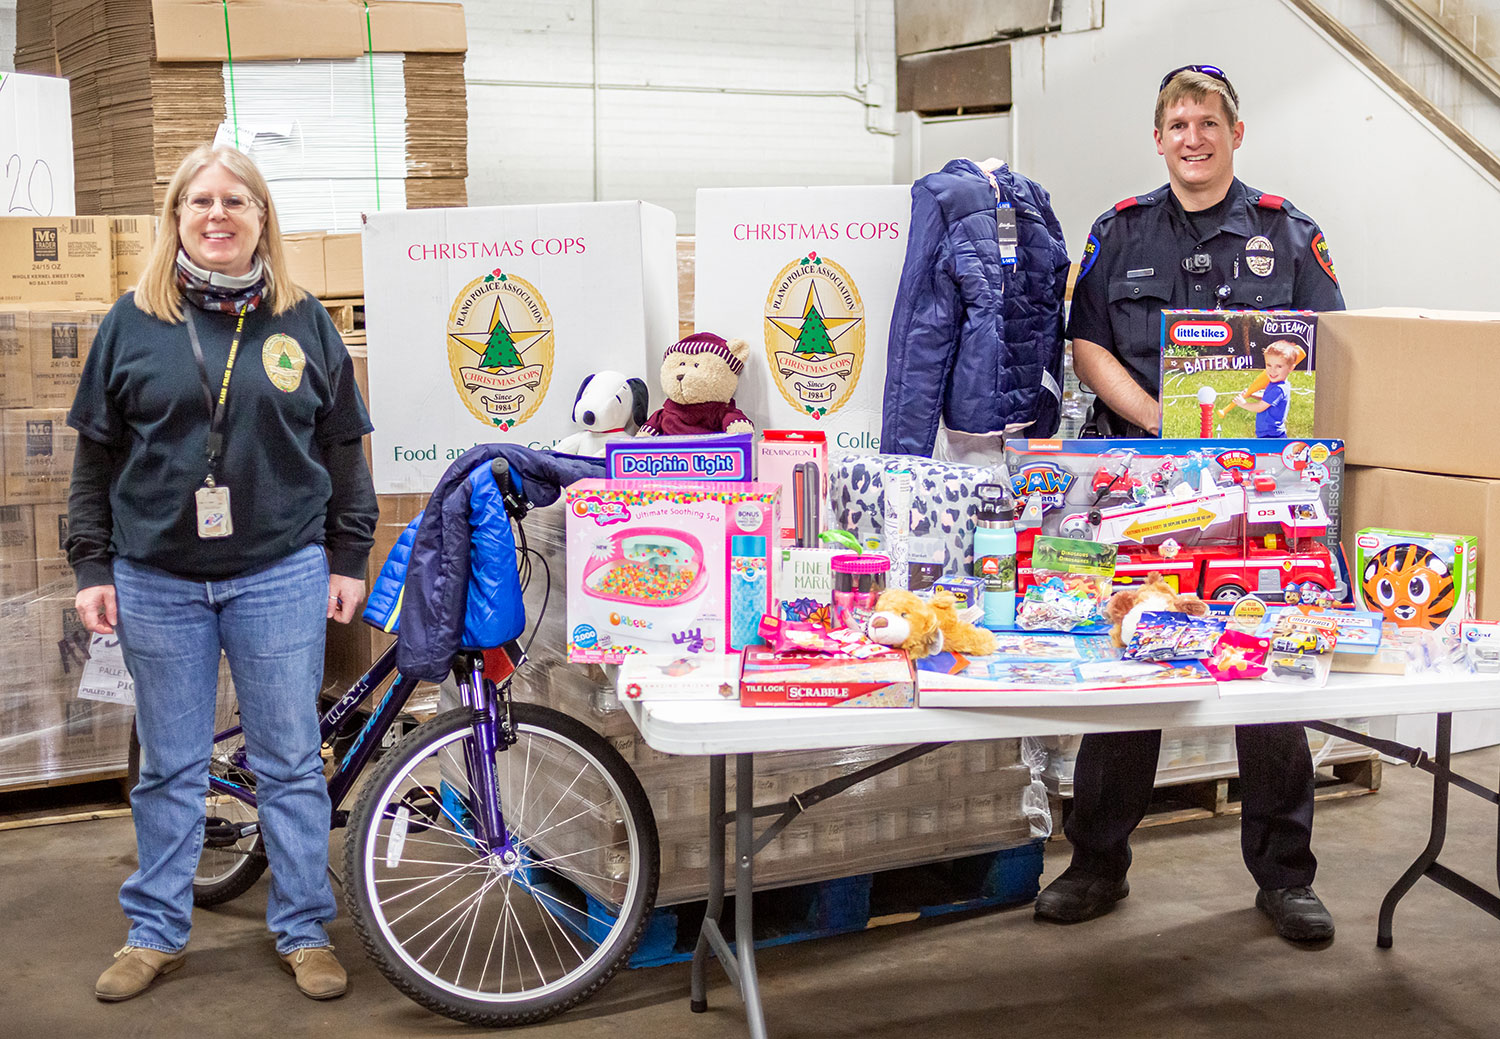 Heather Bowden, Public Information Coordinator for Plano Police, and Plano Police Officer Aaron Graham with the gifts and food boxes that will go to a family with two children